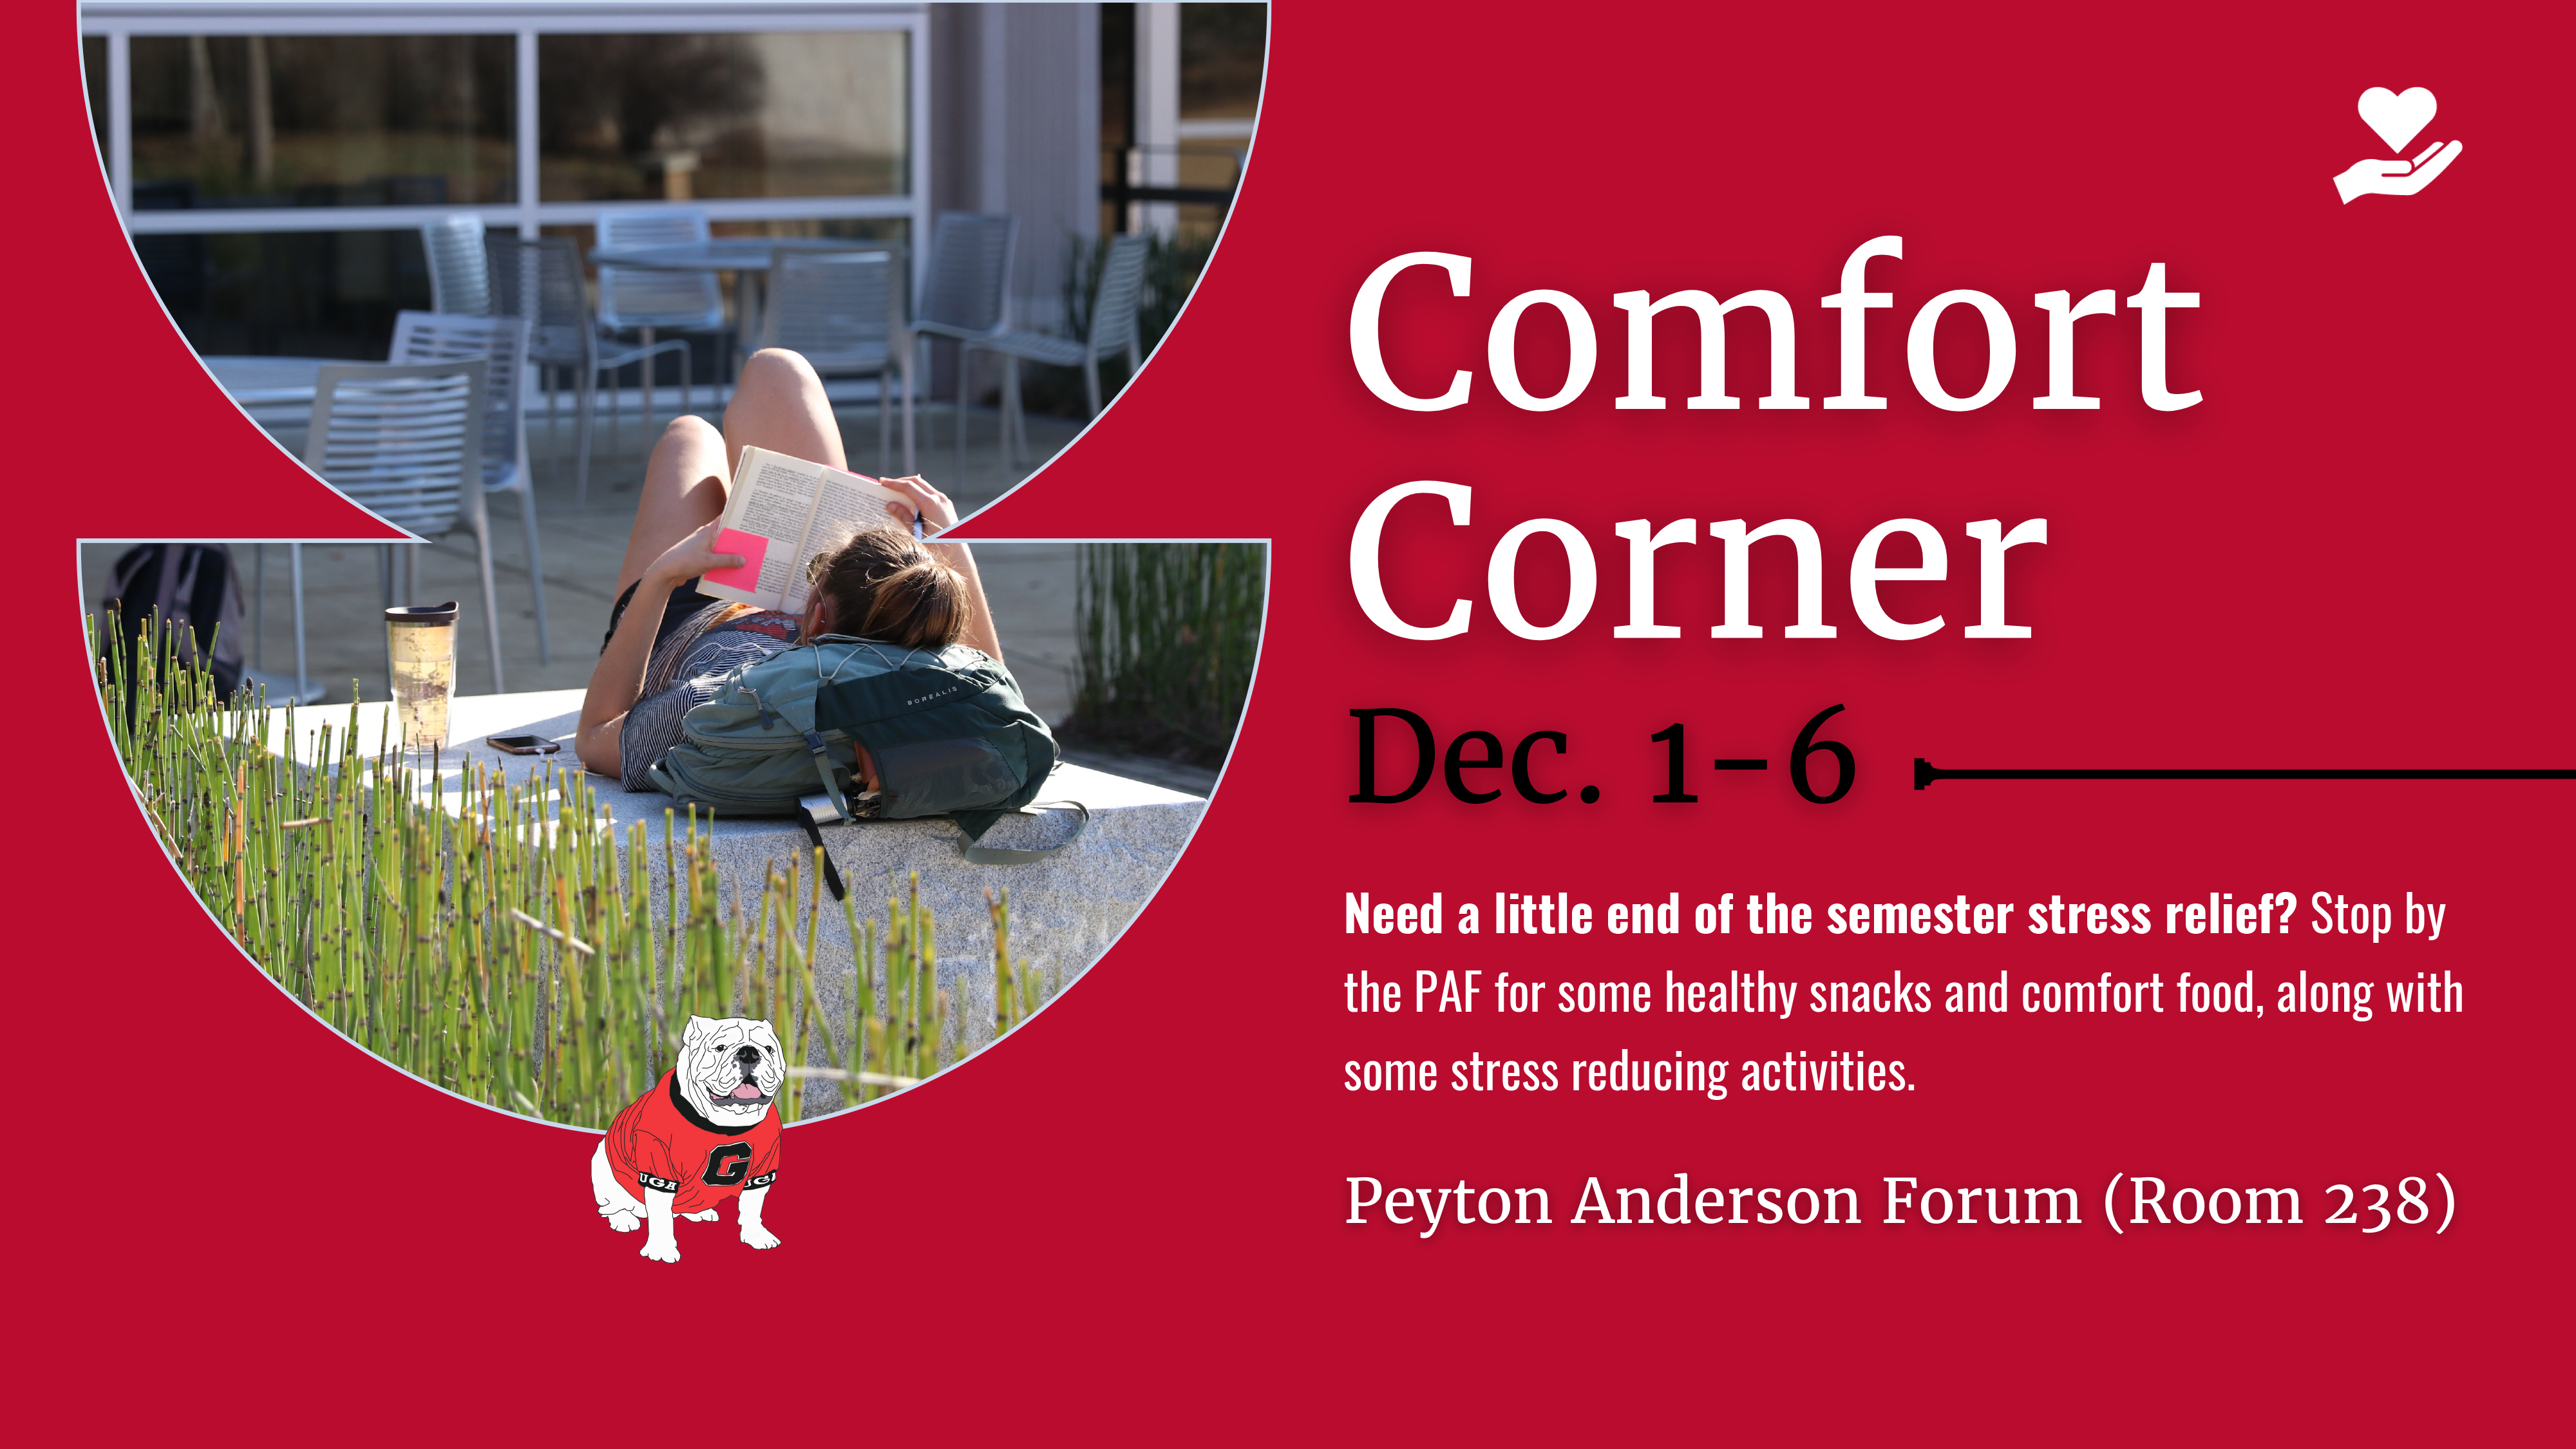 A graphic advertising the comfort corner event in Grady College's Peyton Anderson Forum.